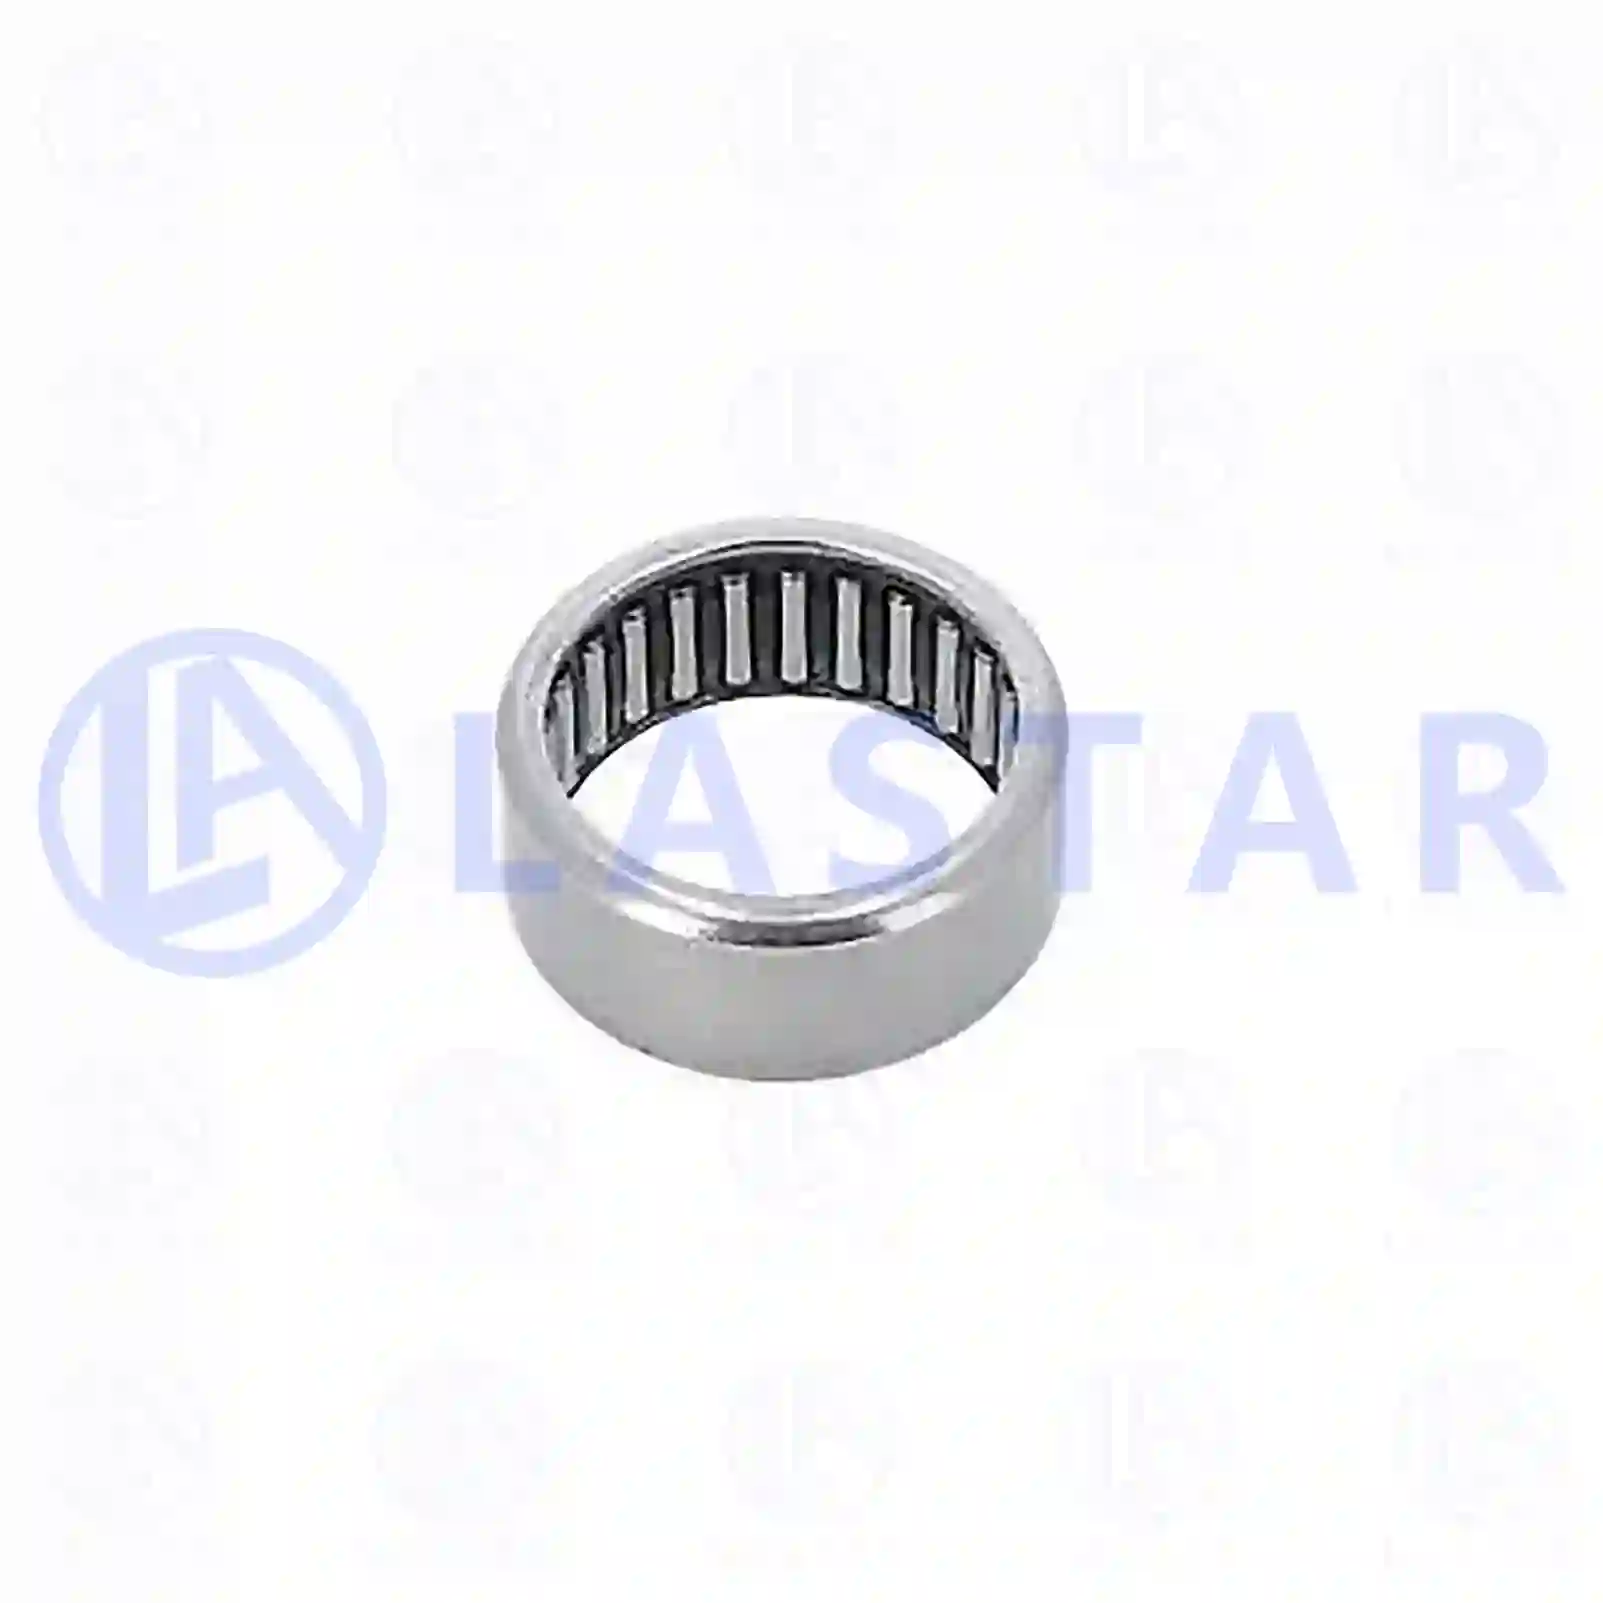 Needle bearing, 77722402, 06337190081, 06337190085, 81934026007, 0099810410 ||  77722402 Lastar Spare Part | Truck Spare Parts, Auotomotive Spare Parts Needle bearing, 77722402, 06337190081, 06337190085, 81934026007, 0099810410 ||  77722402 Lastar Spare Part | Truck Spare Parts, Auotomotive Spare Parts